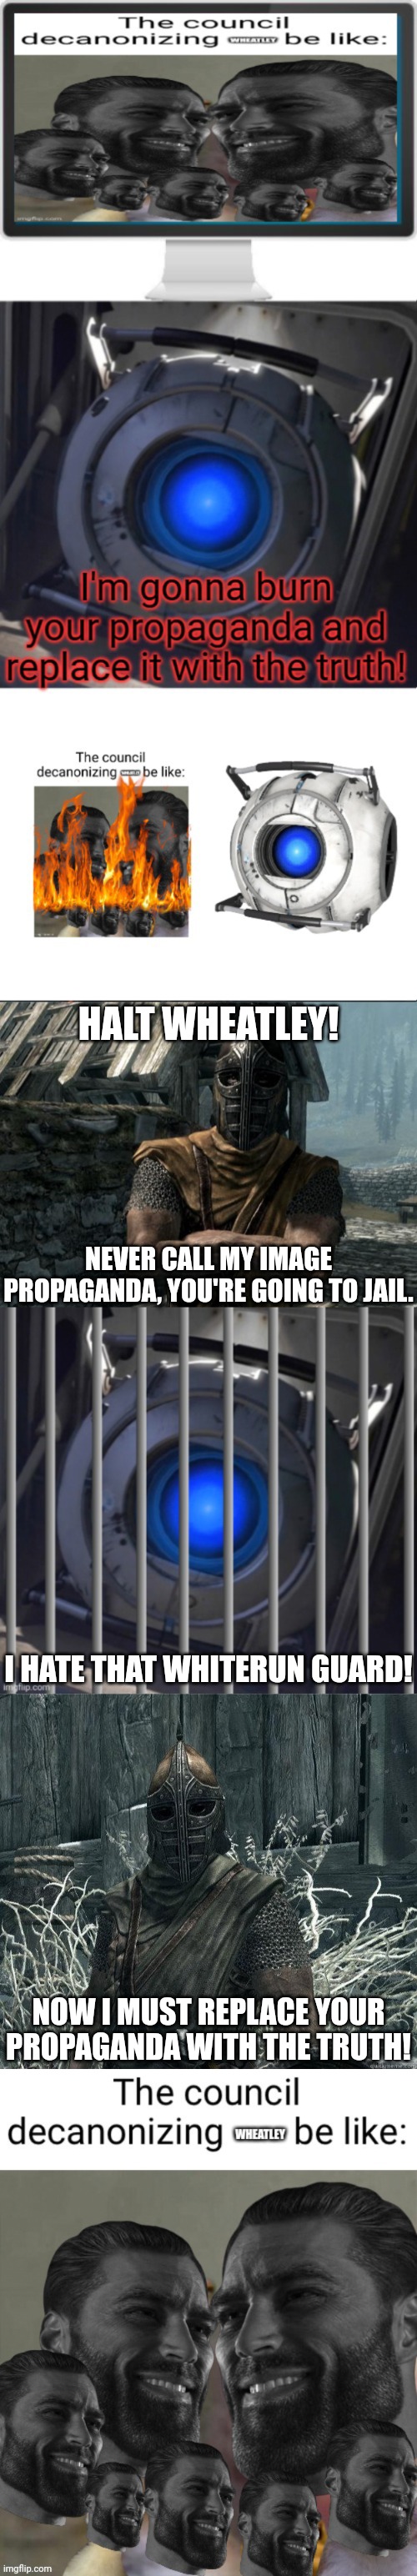 Cry about it Wheatless | HALT WHEATLEY! NEVER CALL MY IMAGE PROPAGANDA, YOU'RE GOING TO JAIL. I HATE THAT WHITERUN GUARD! NOW I MUST REPLACE YOUR PROPAGANDA WITH THE TRUTH! | image tagged in skyrim guards be like,wheatley in jail,skyrimguard | made w/ Imgflip meme maker